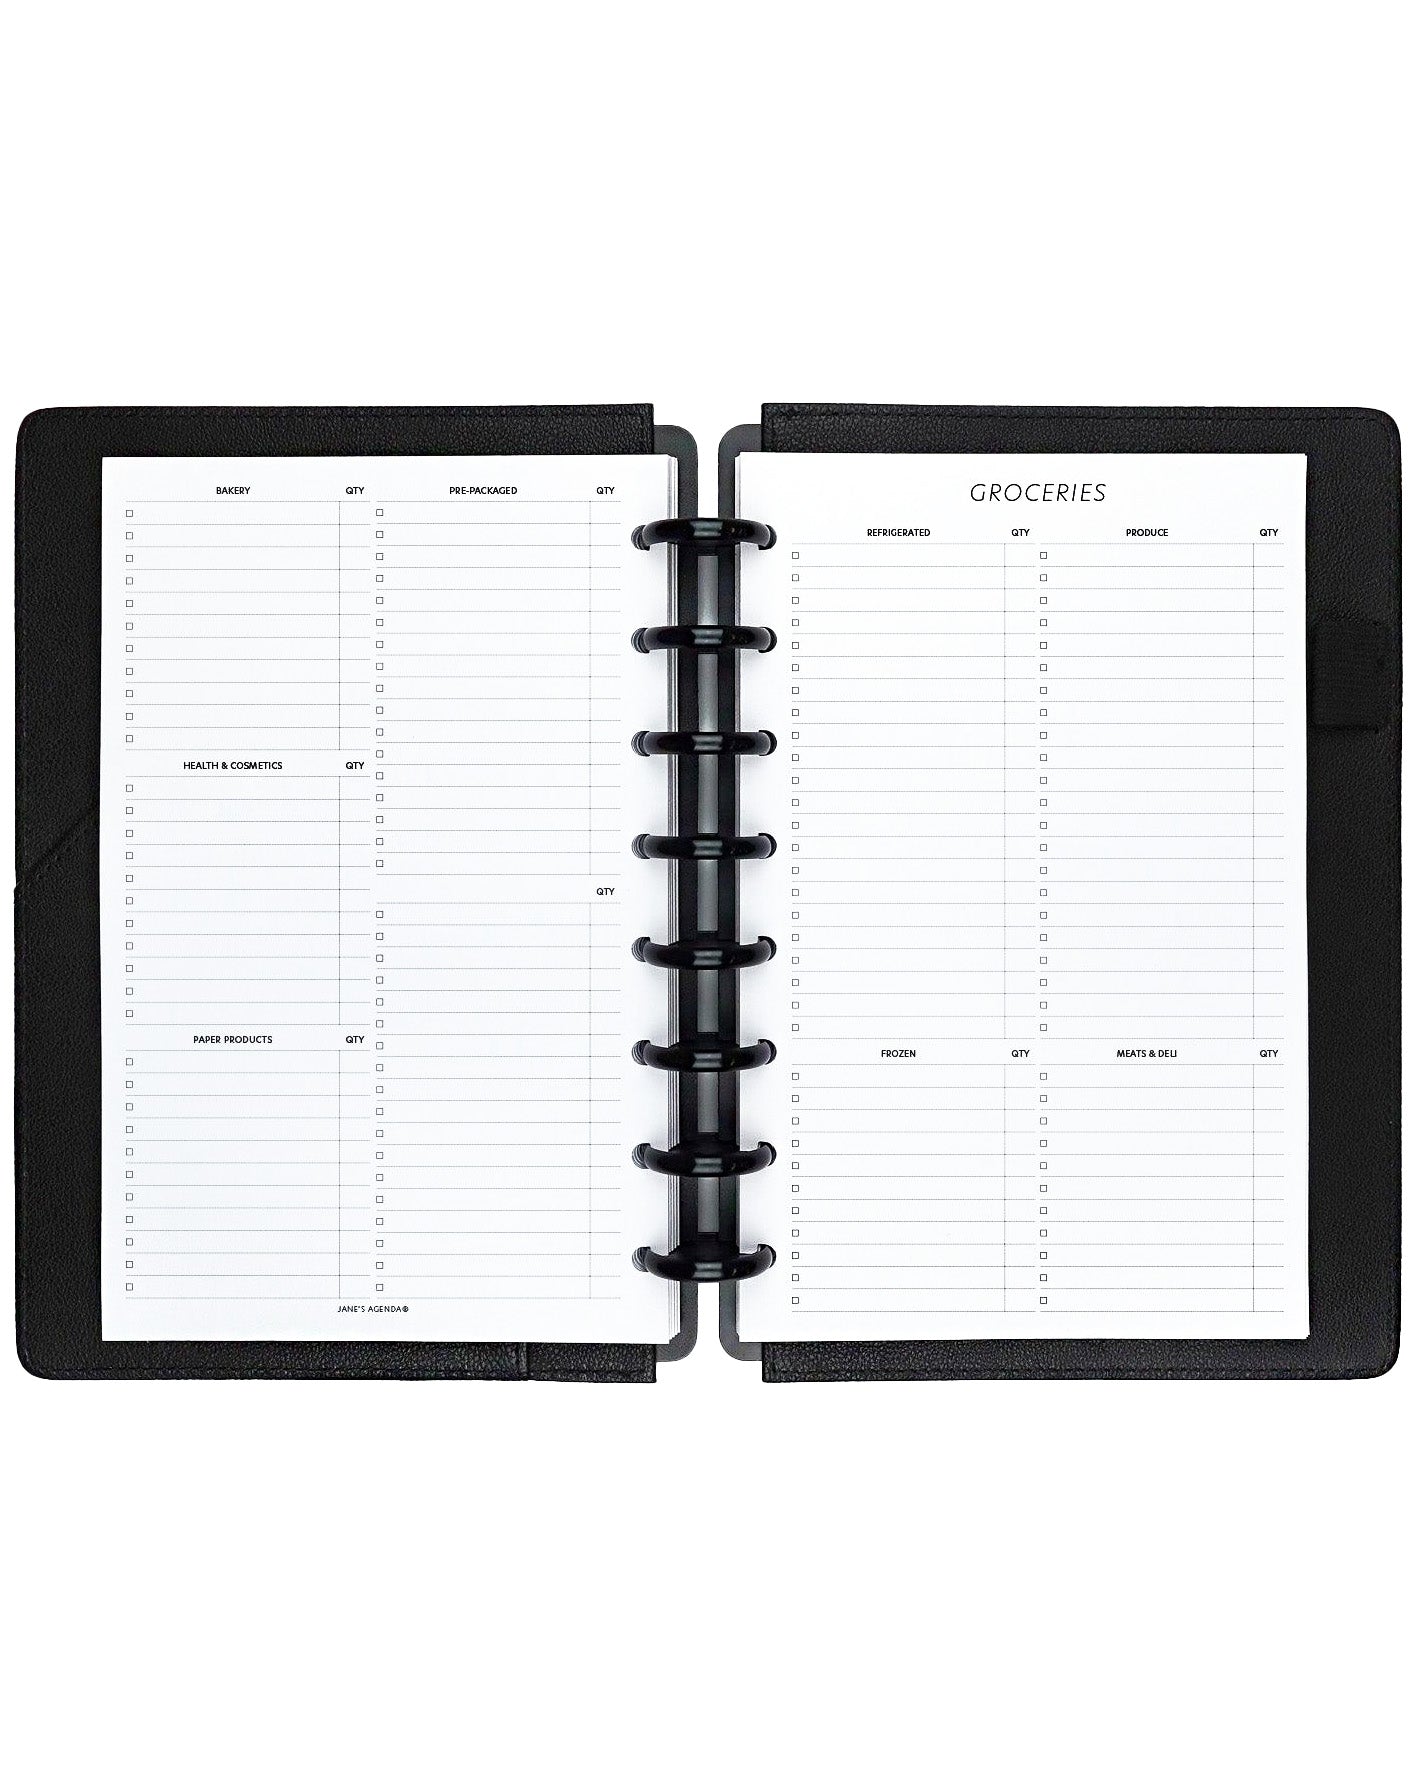 Grocery list planner inserts for discbound planners by Jane's Agenda. 